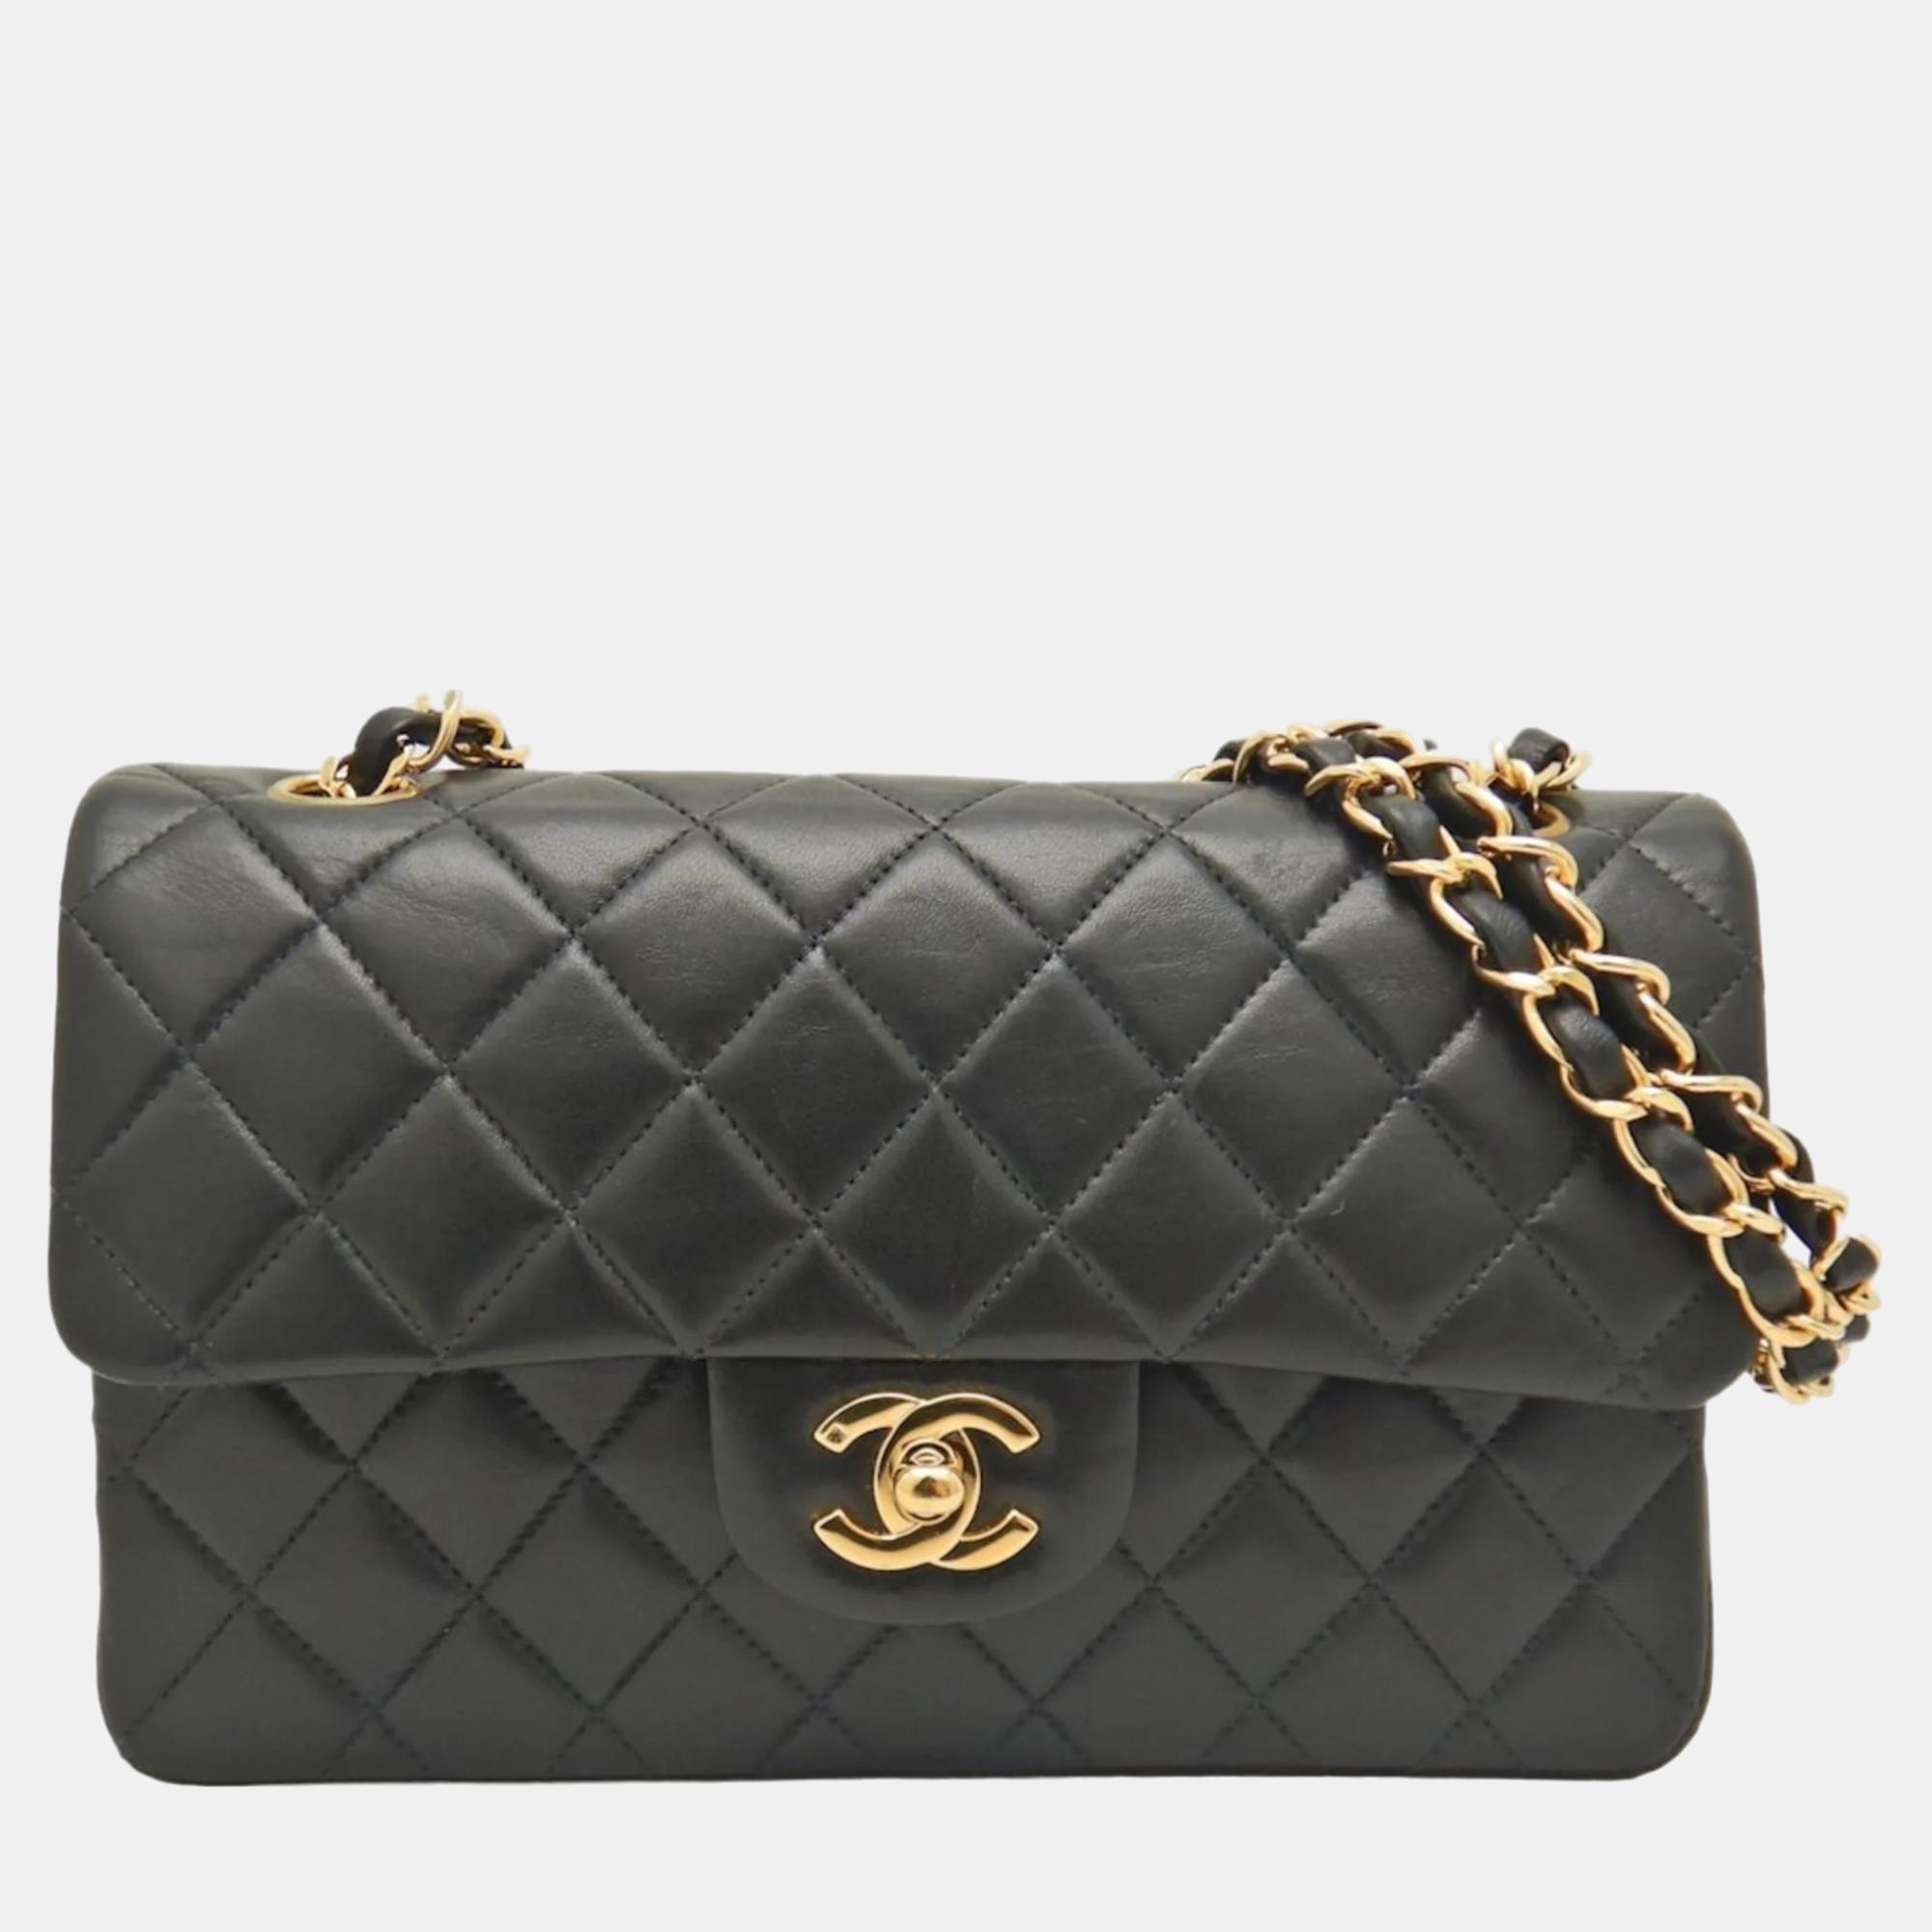 Chanel black lambskin leather small classic double flap shoulder bags